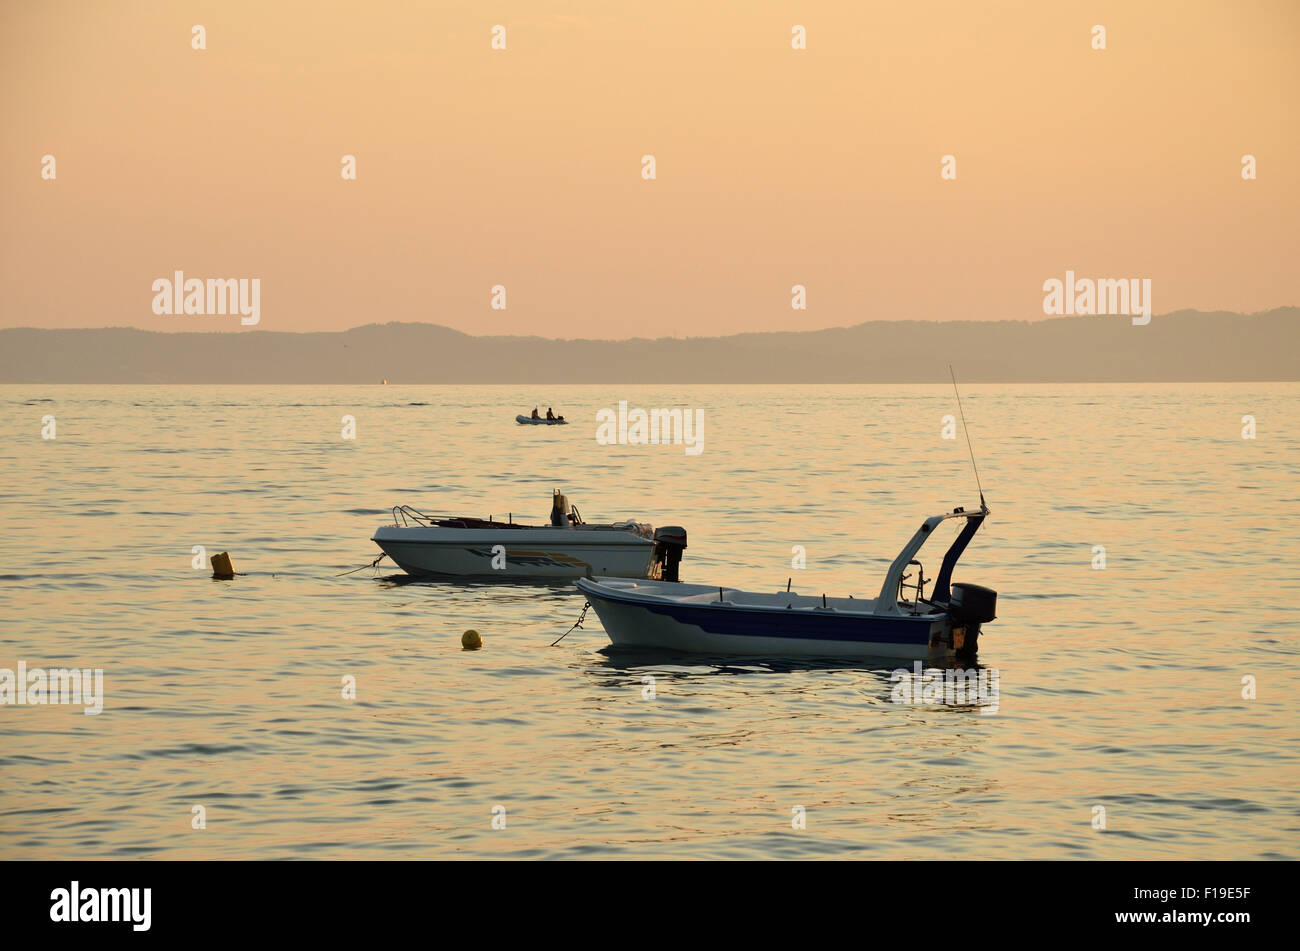 Two boats on sea with a third one and mountains in background in sunset time Stock Photo